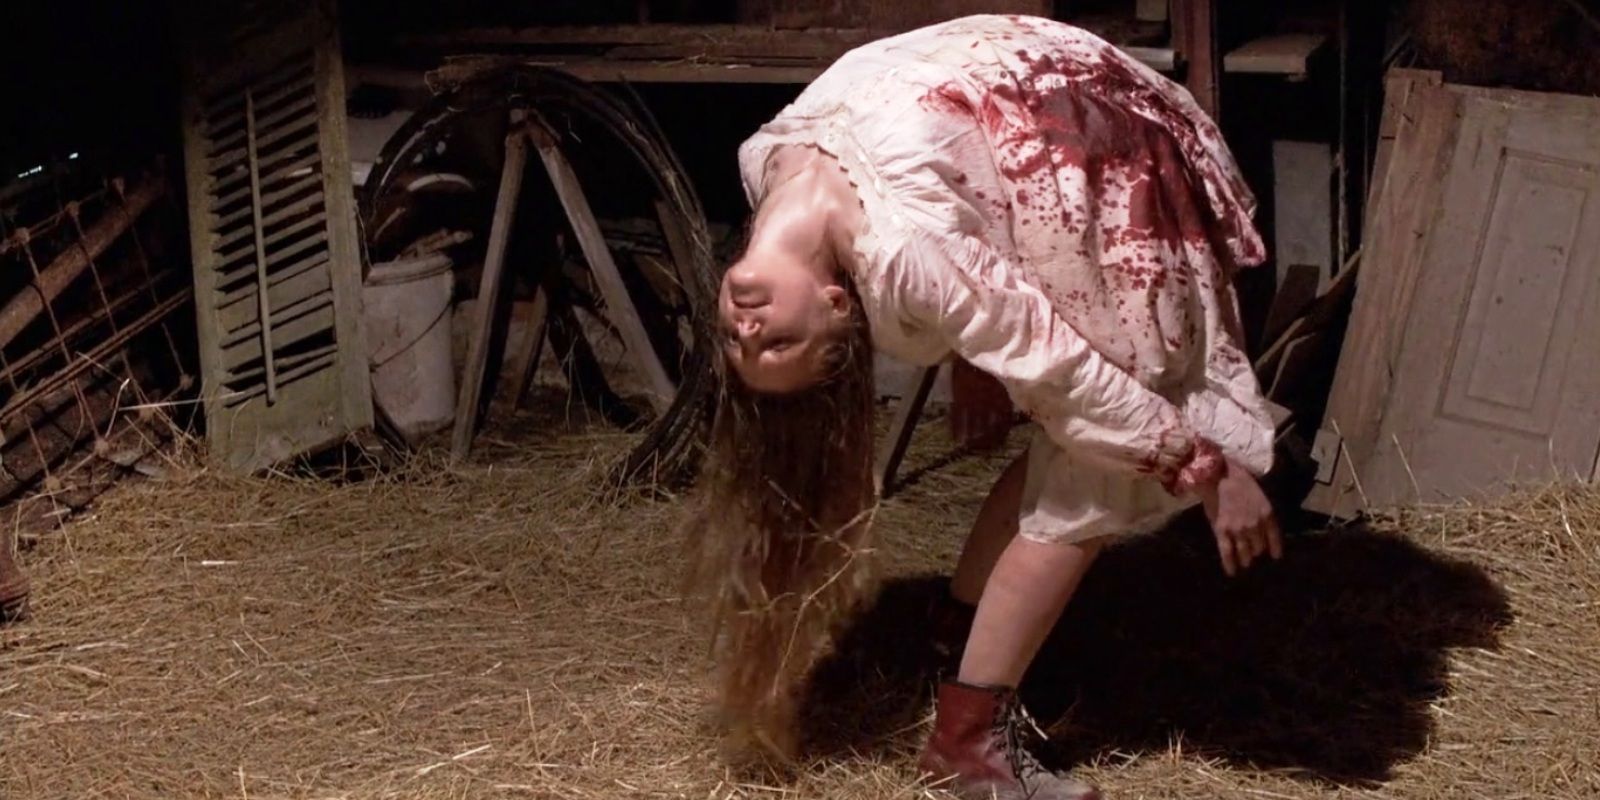 A woman bending backwards in a blood-stained dress in a barn in The Last Exorcism